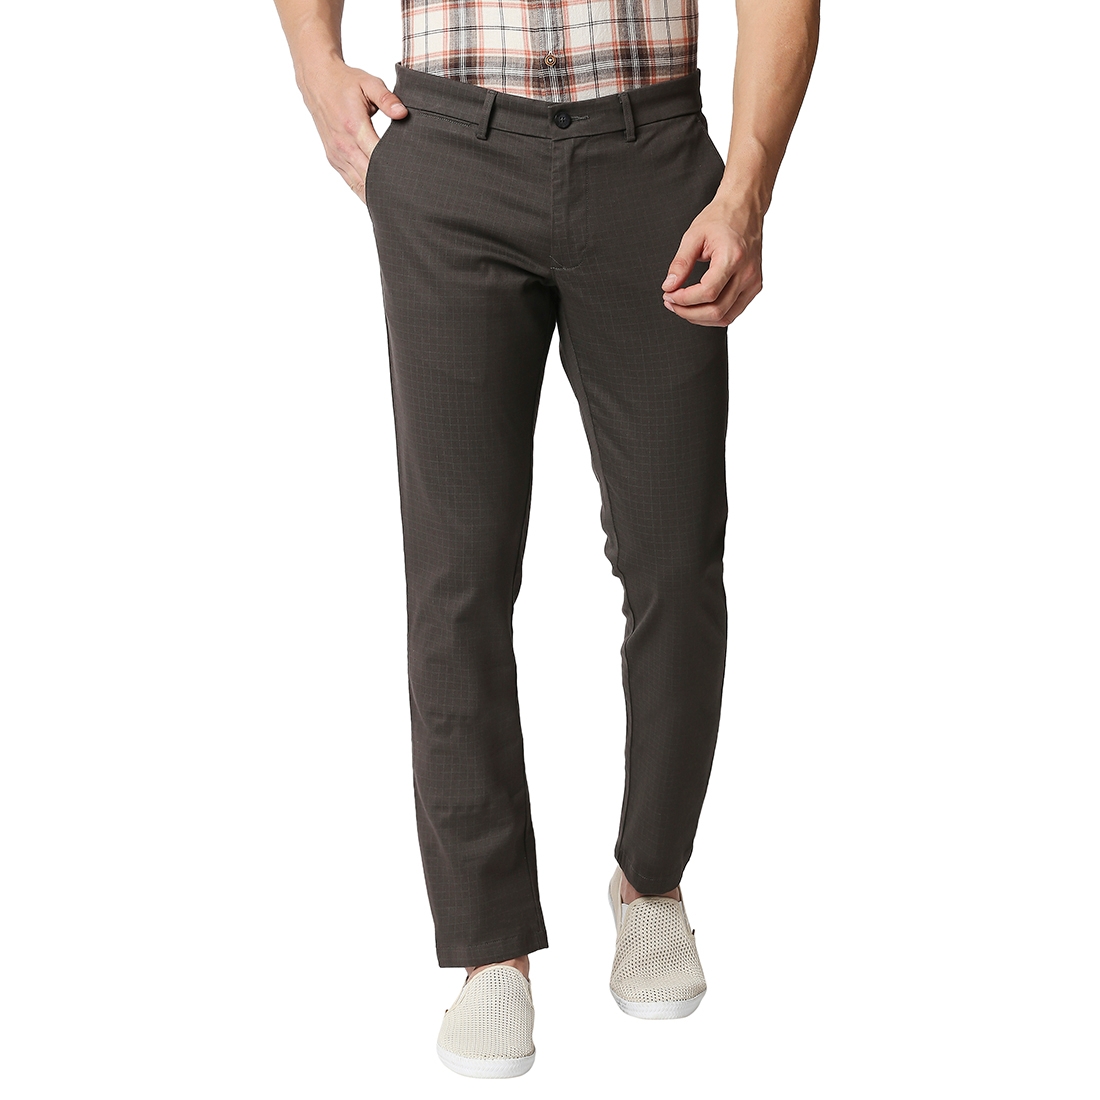 Basics | BASICS CASUAL PRINTED DARK GREY COTTON STRETCH TAPERED TROUSERS 